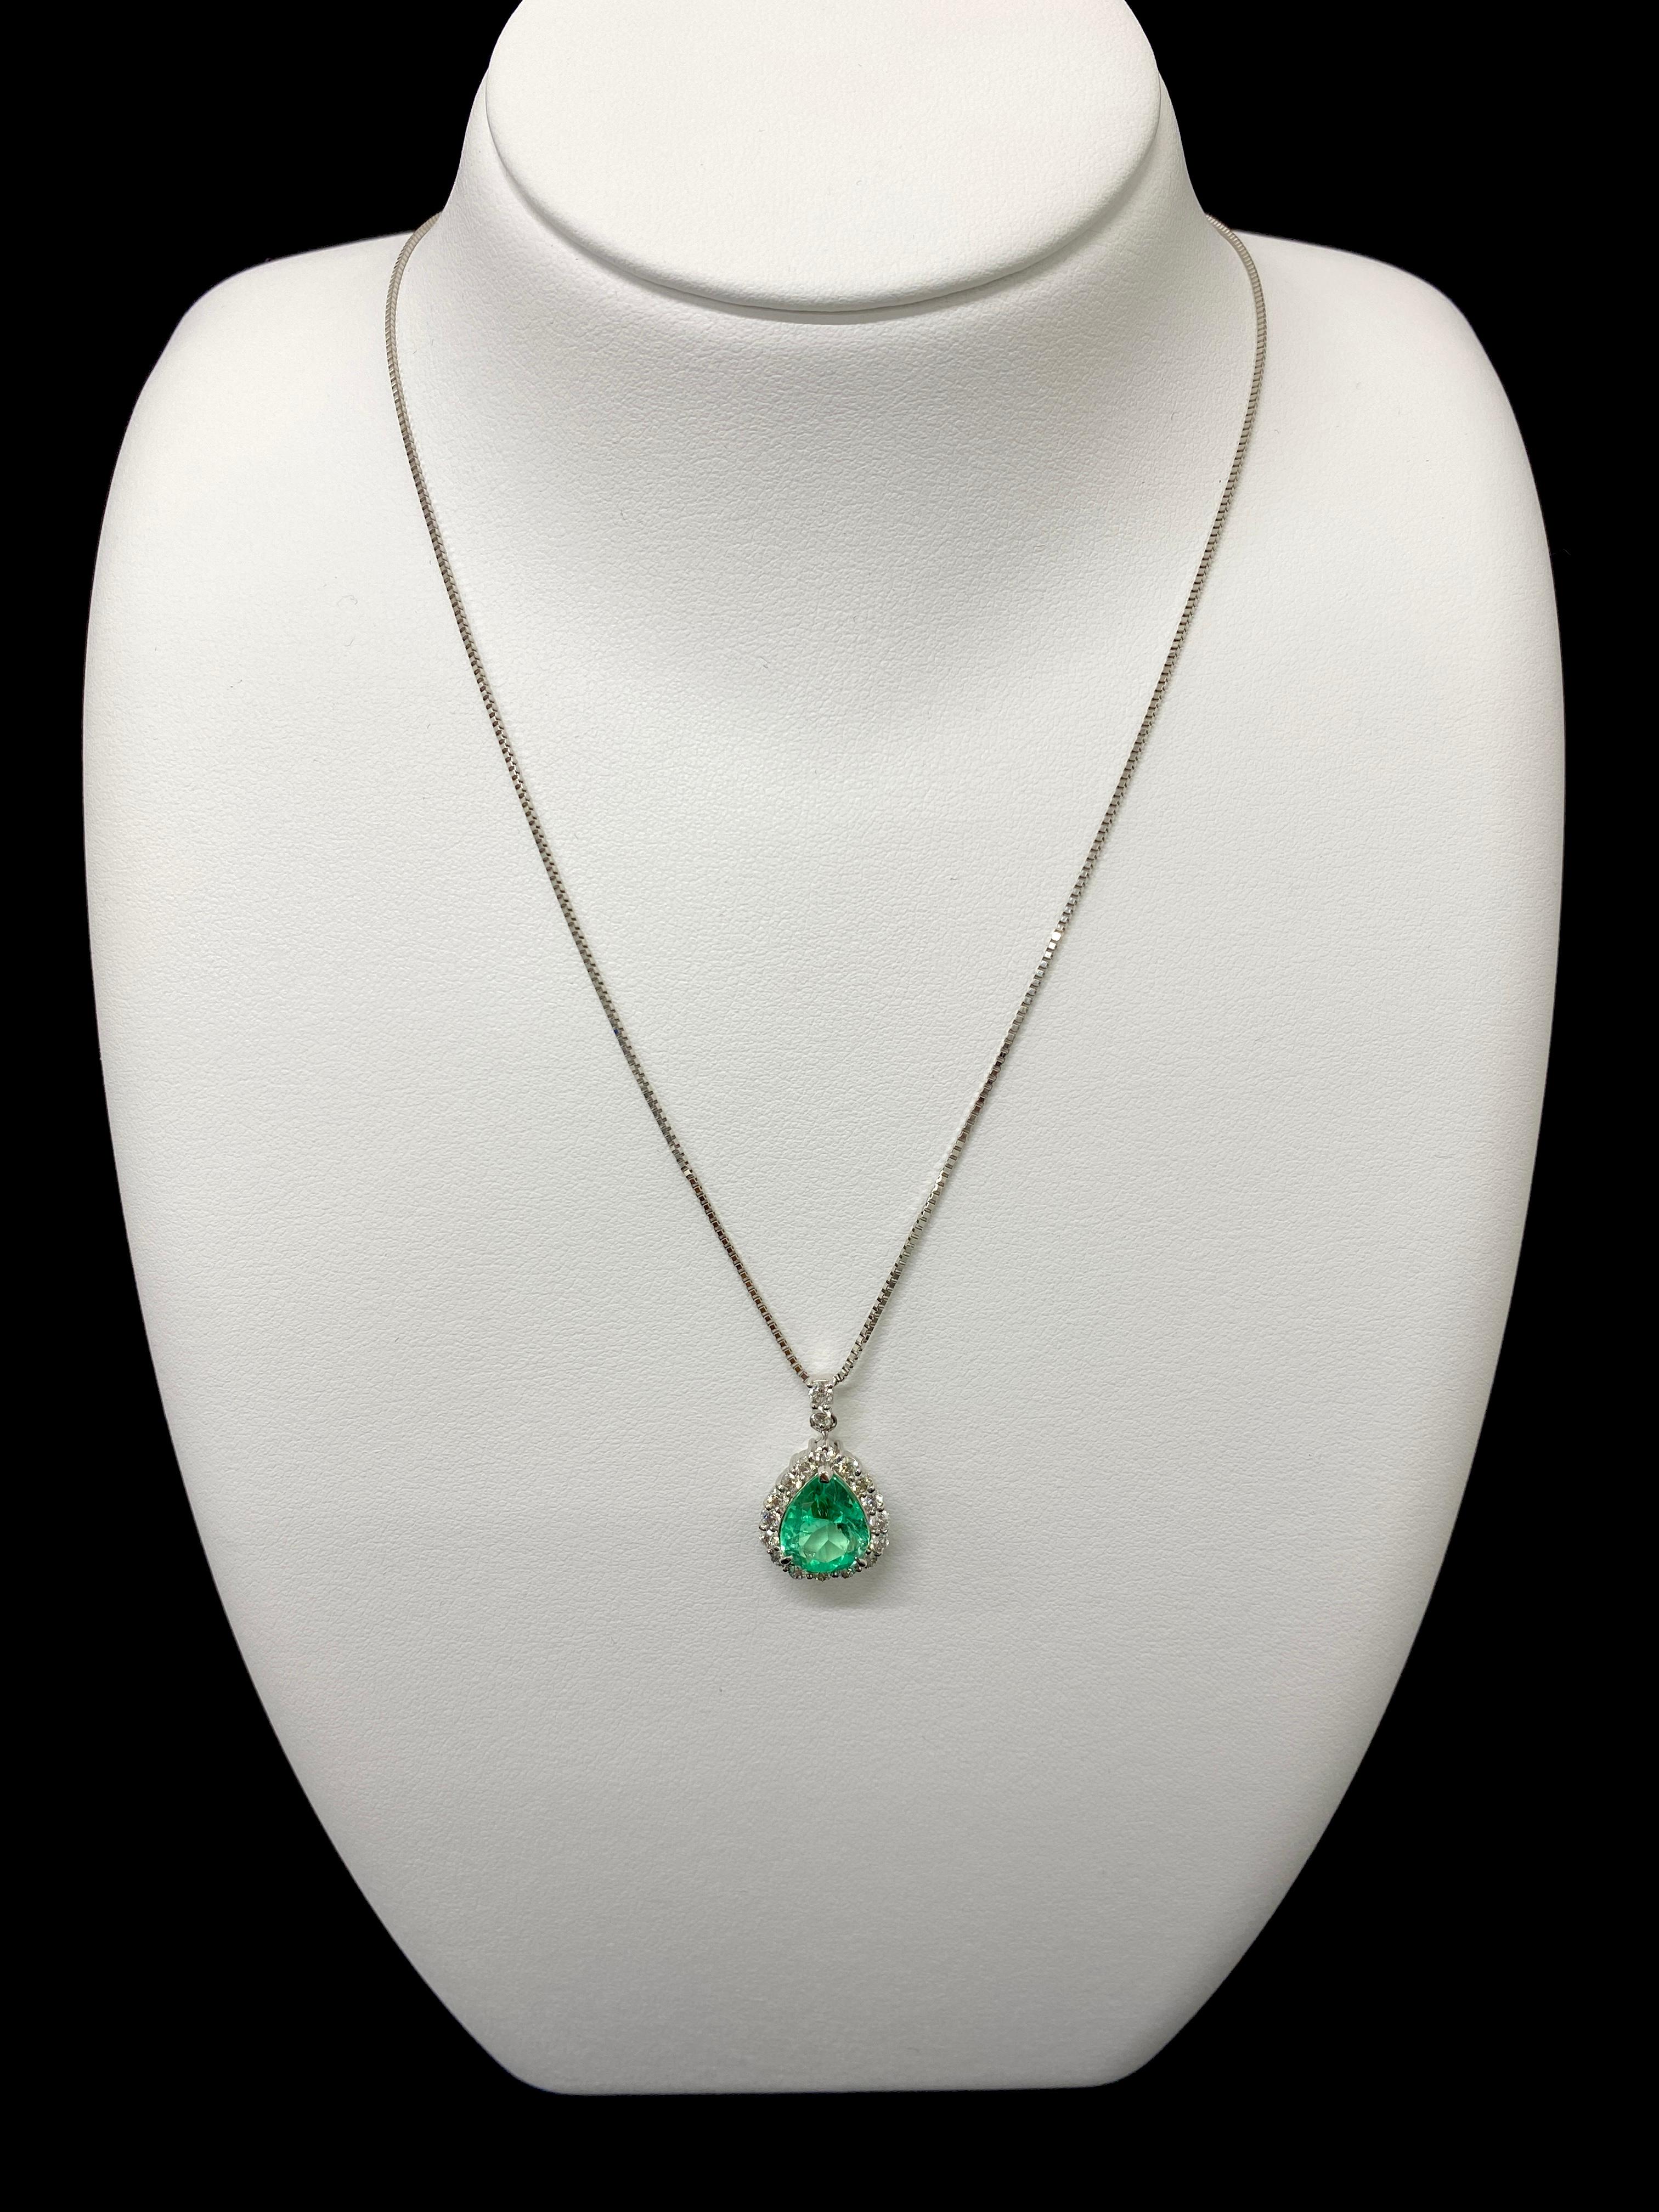 A stunning Pendant featuring a 1.98 Carat, Natural Emerald and 0.54 Carats of Diamond Accents set in Platinum. People have admired emerald’s green for thousands of years. Emeralds have always been associated with the lushest landscapes and the